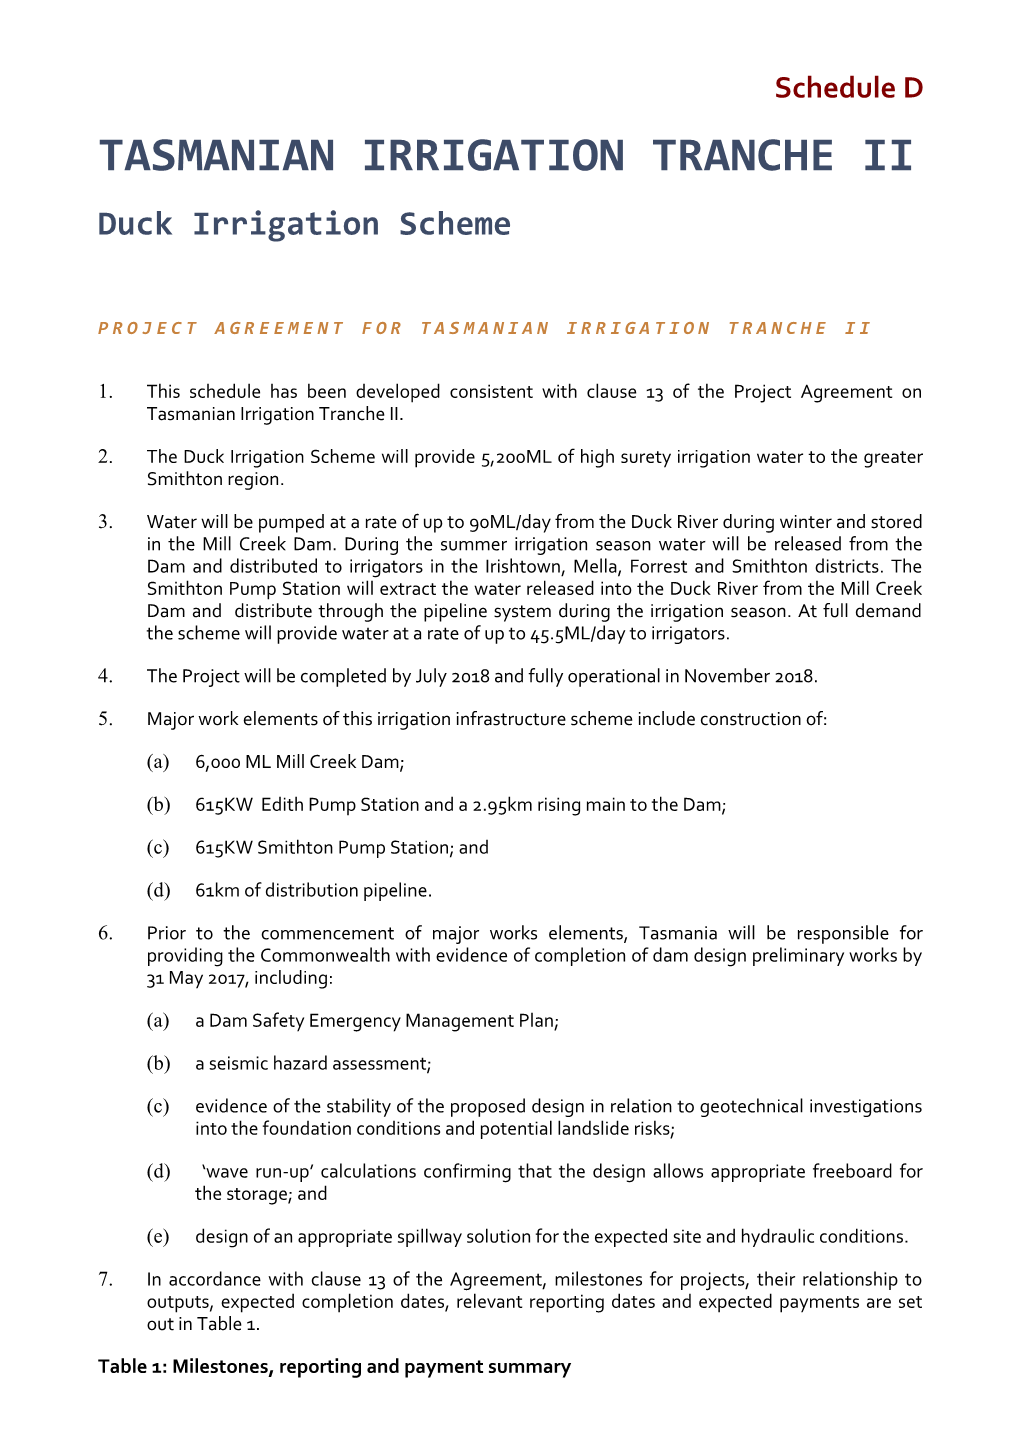 Schedule D to the Project Agreement for Tasmanian Irrigation Tranche II